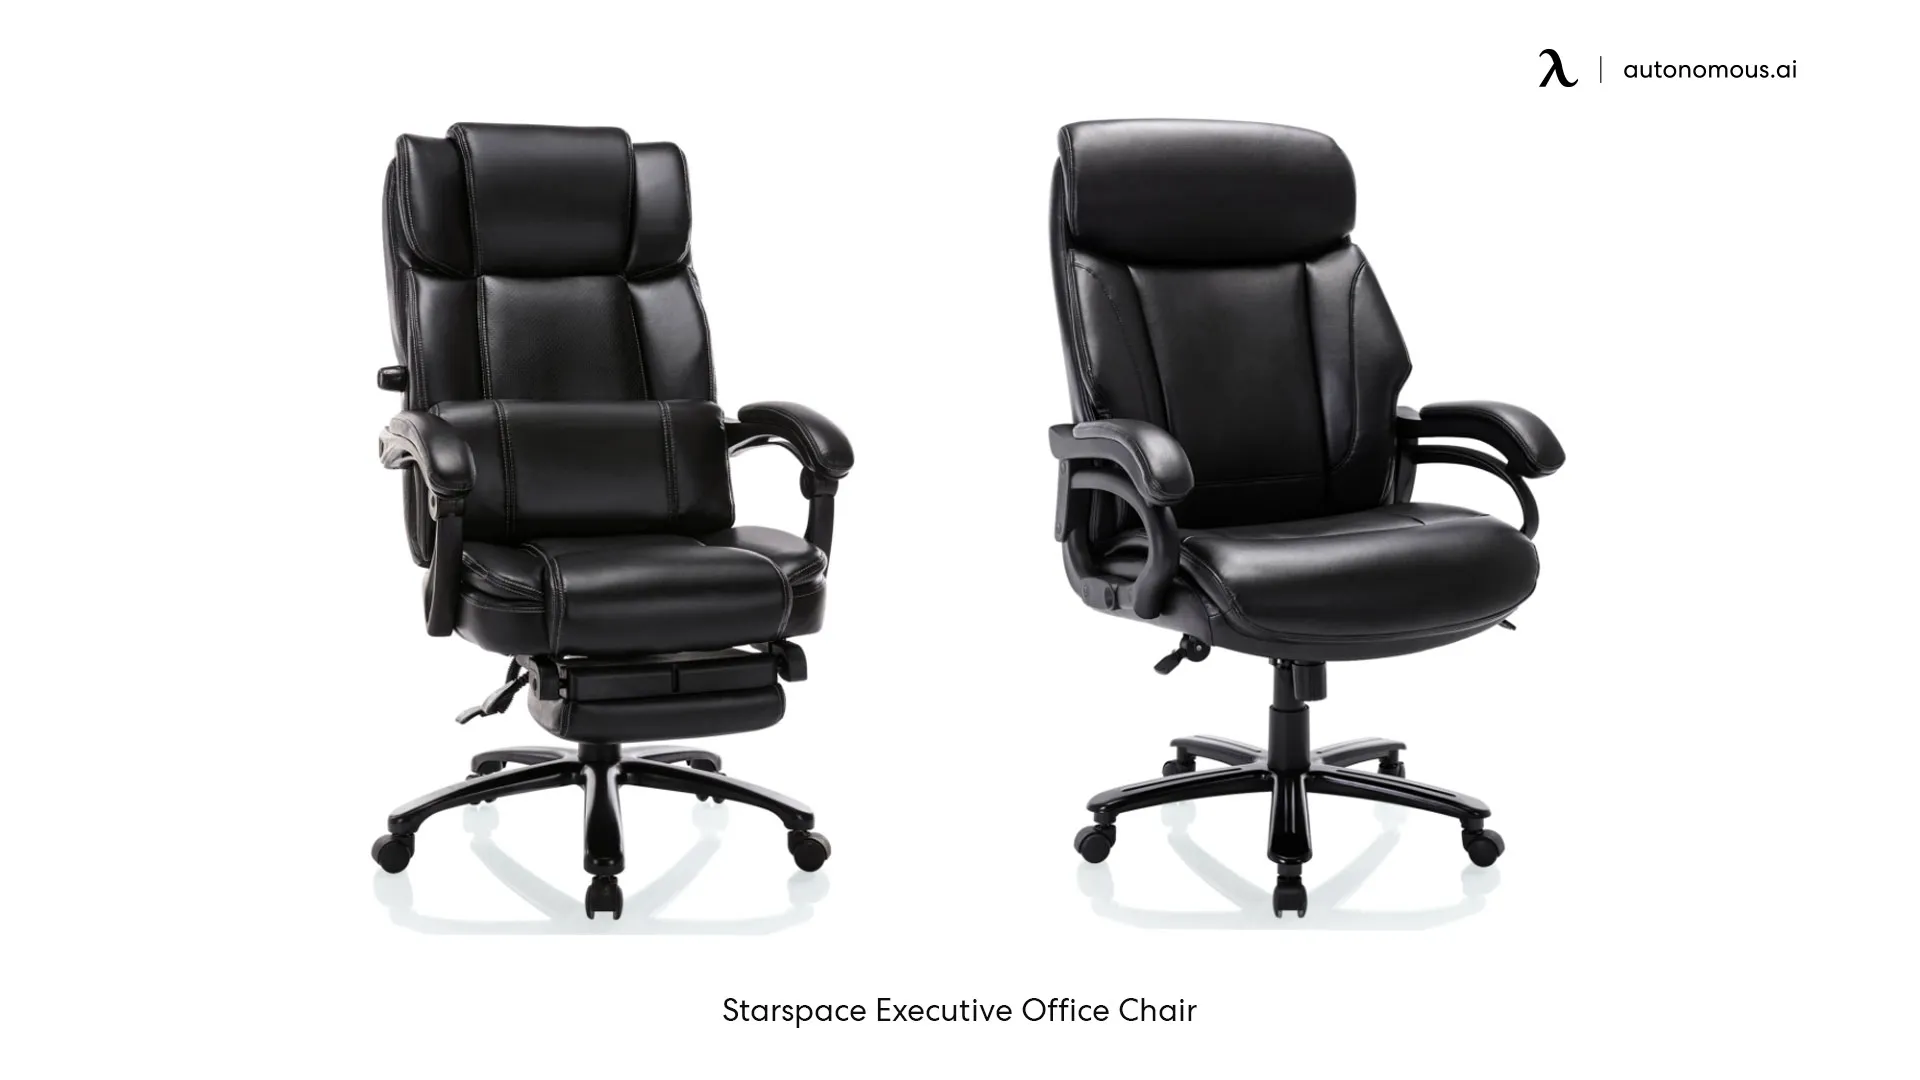 Starspace Executive Office Chair